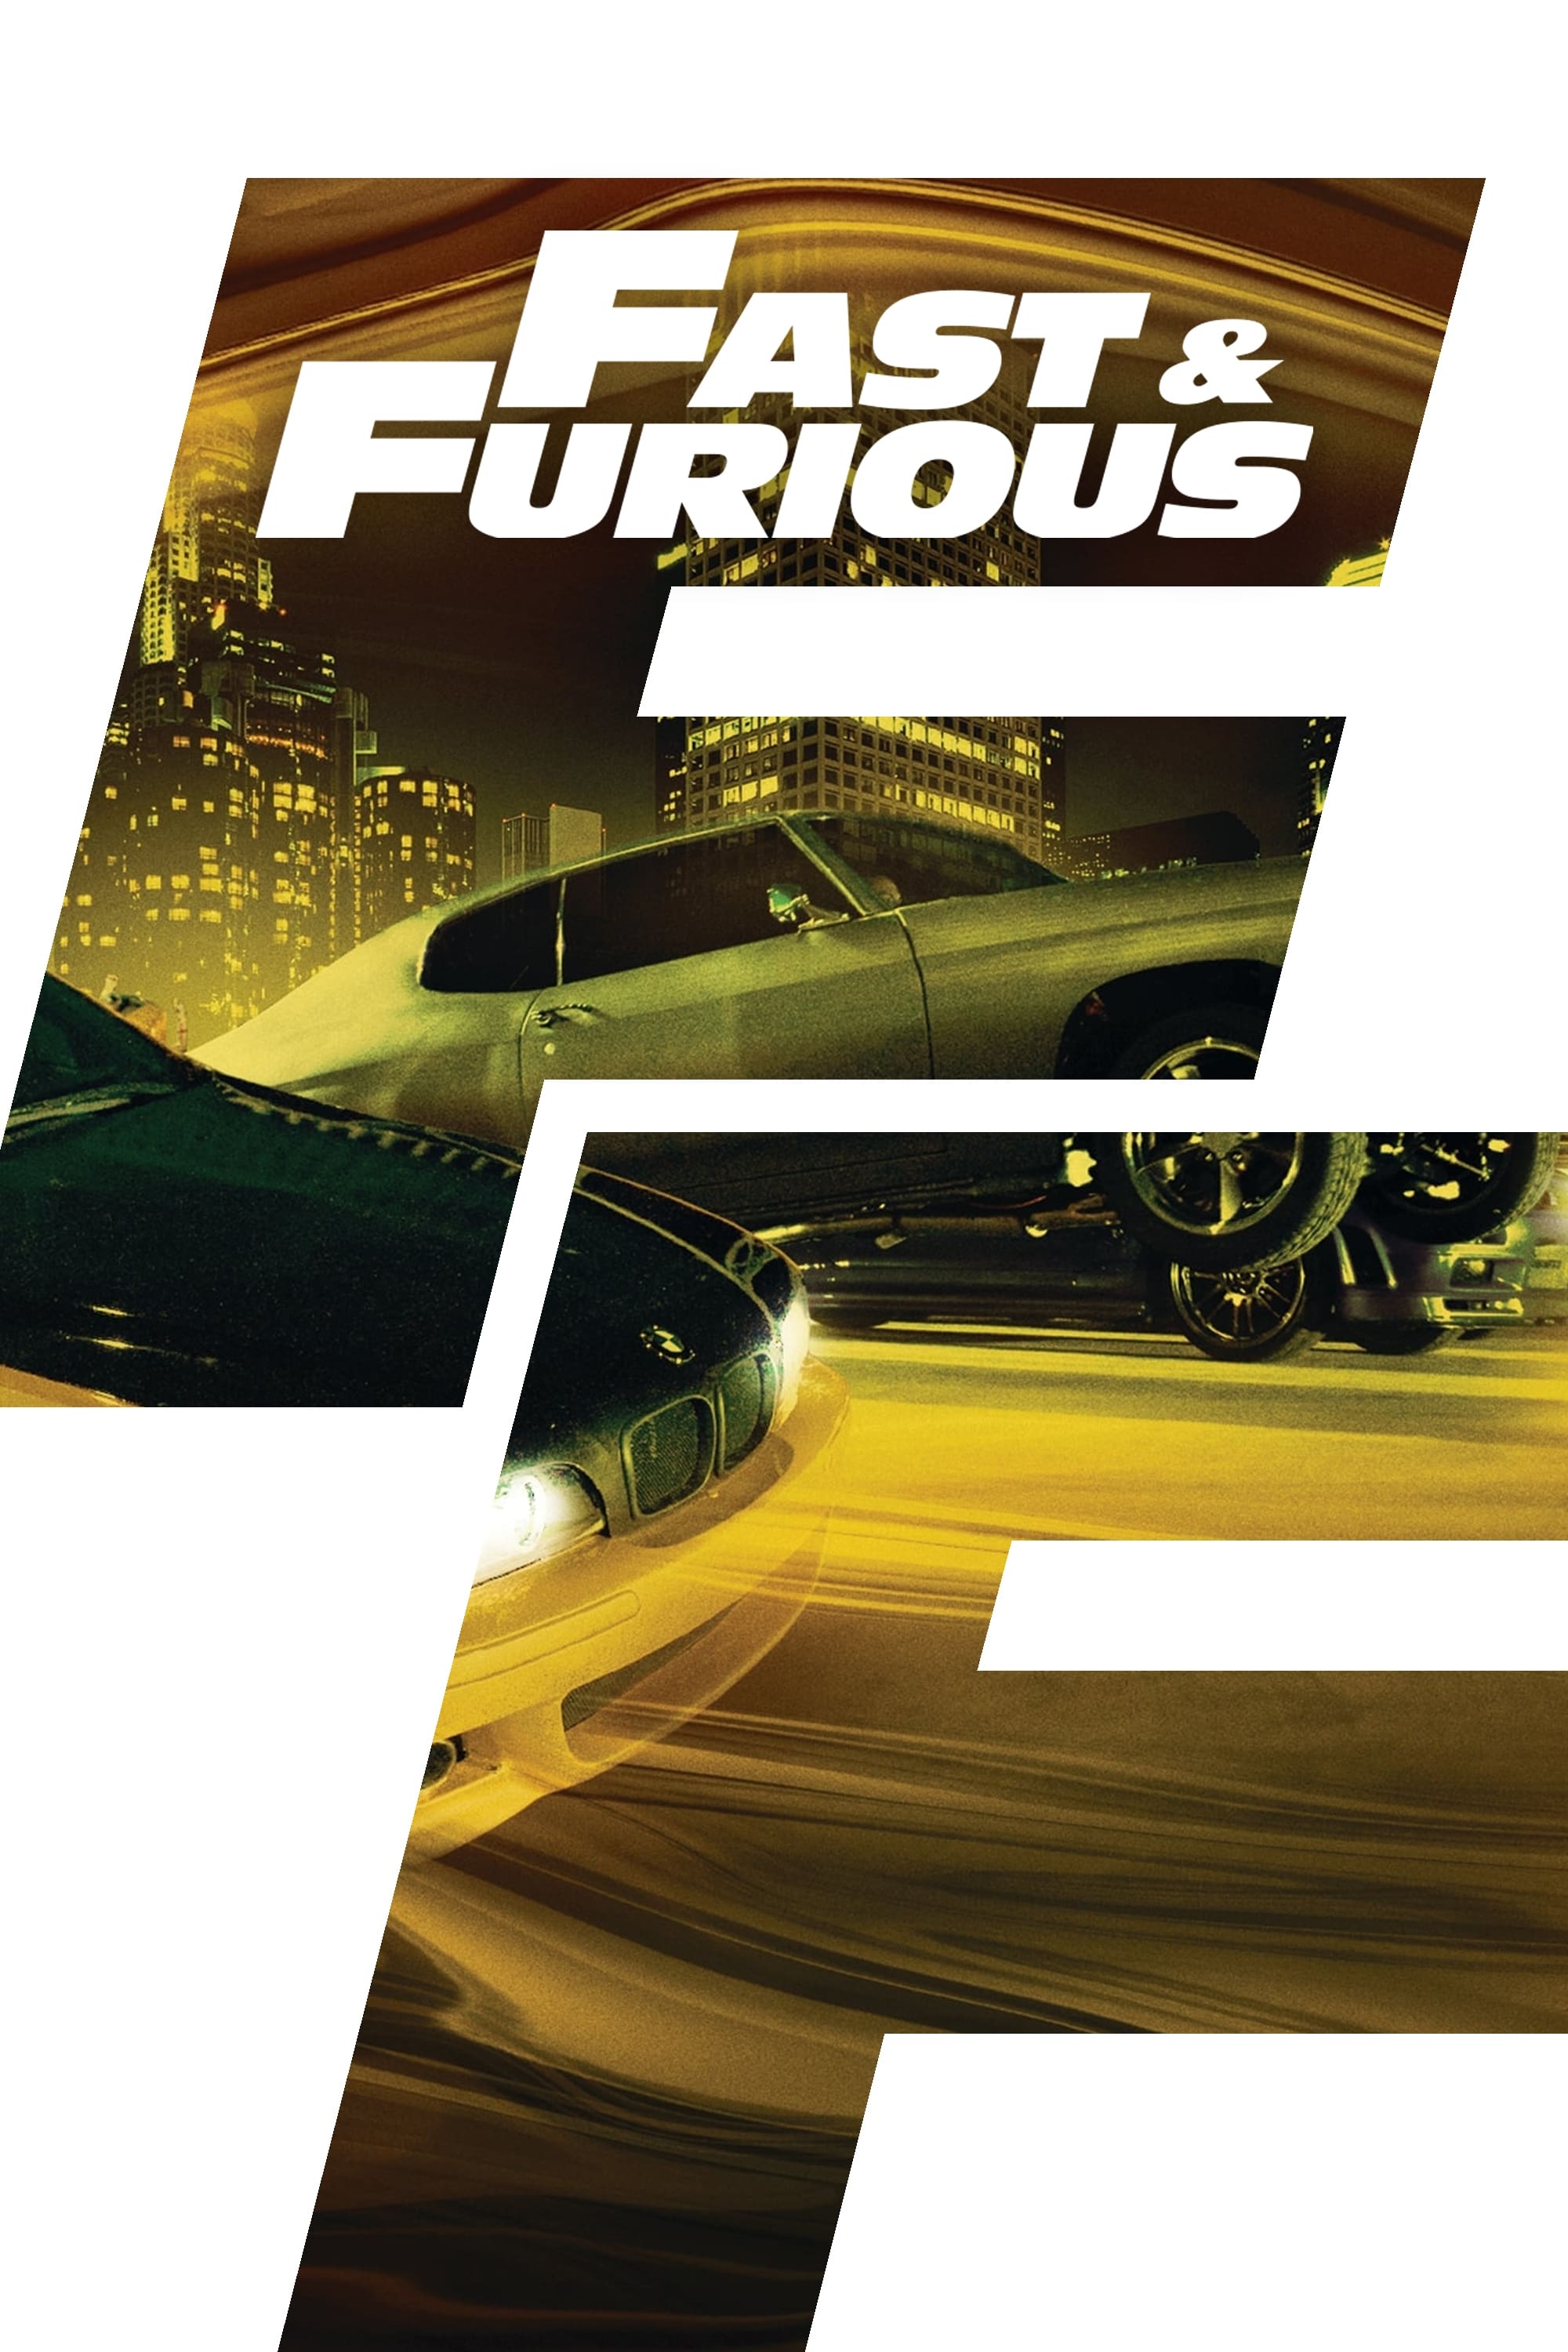 Fast & Furious POSTER